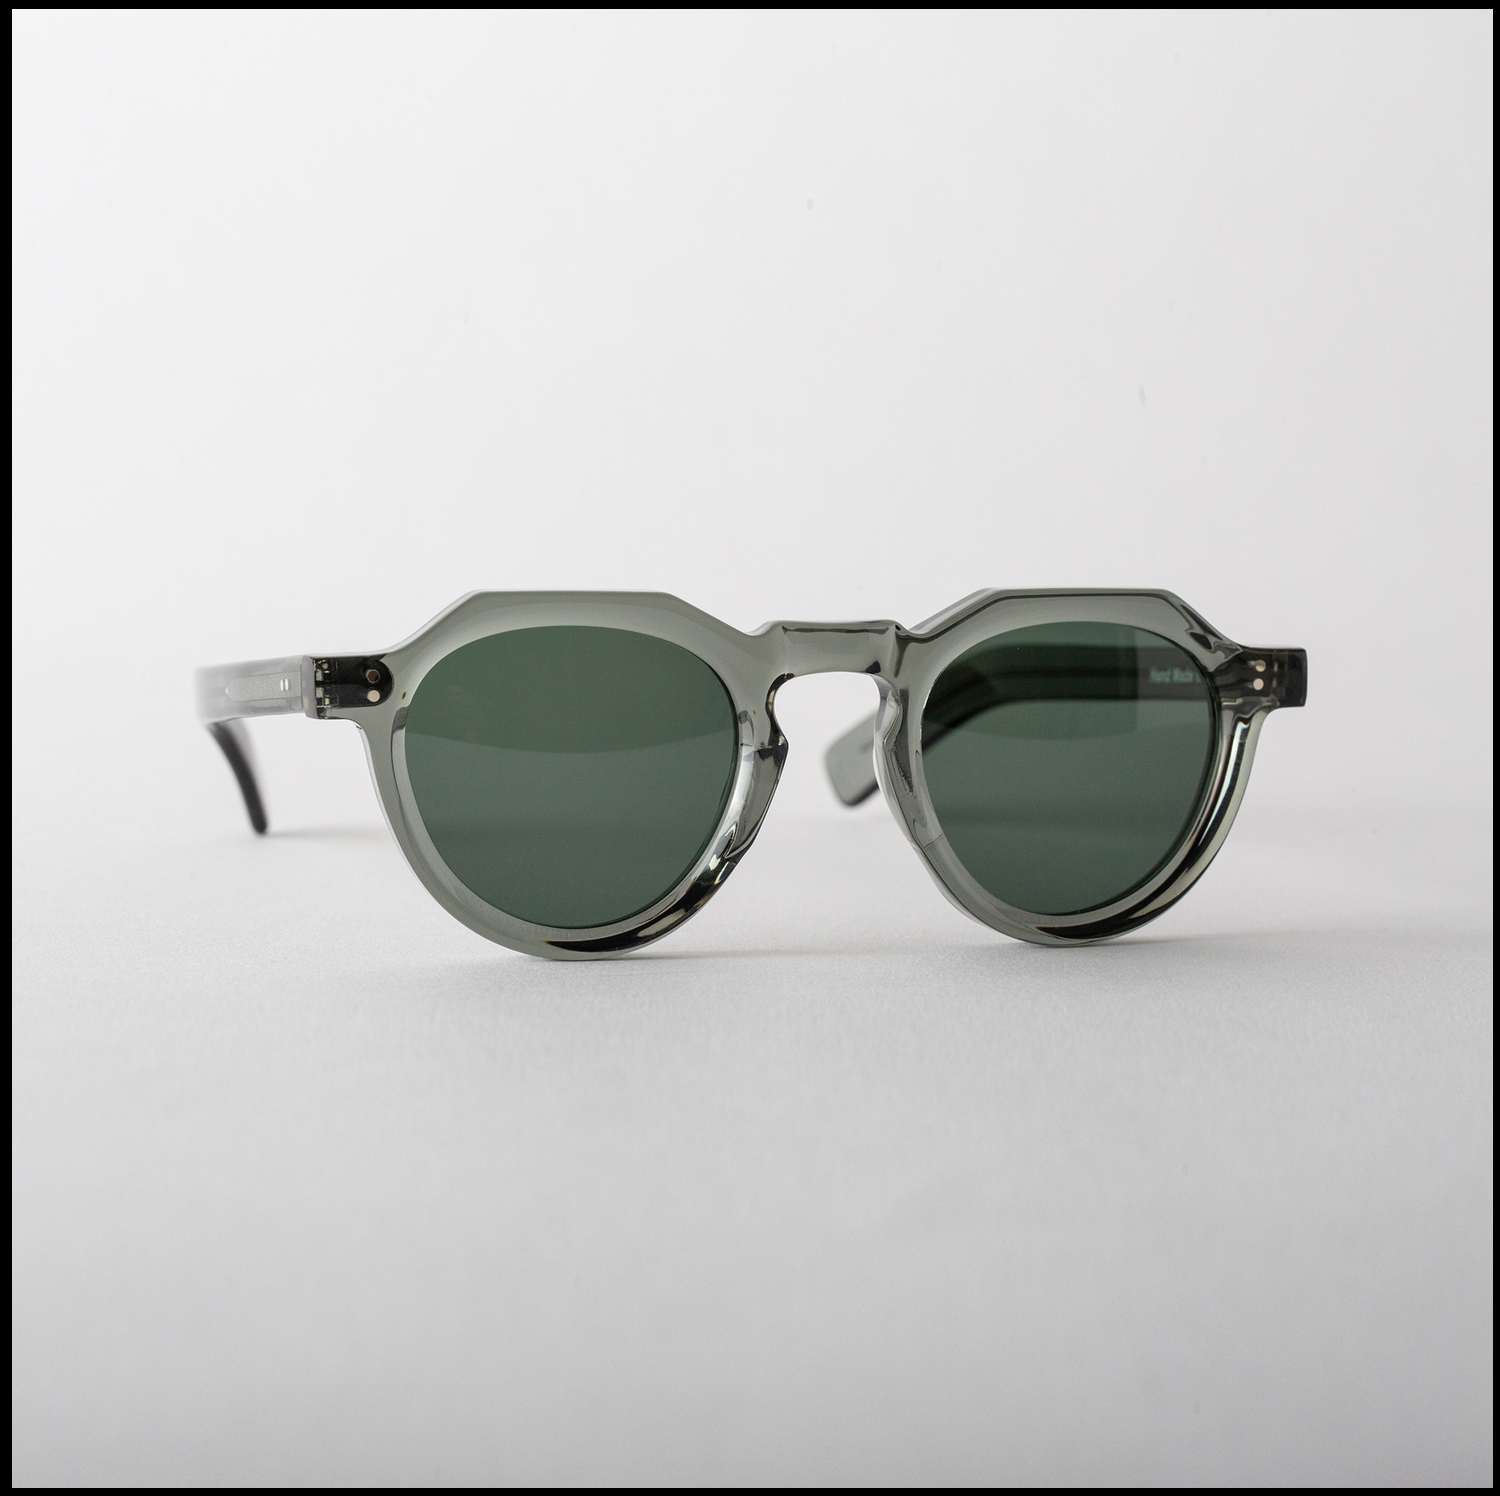 Sunglasses MOD.01 in Lovat green color by Arpenteur